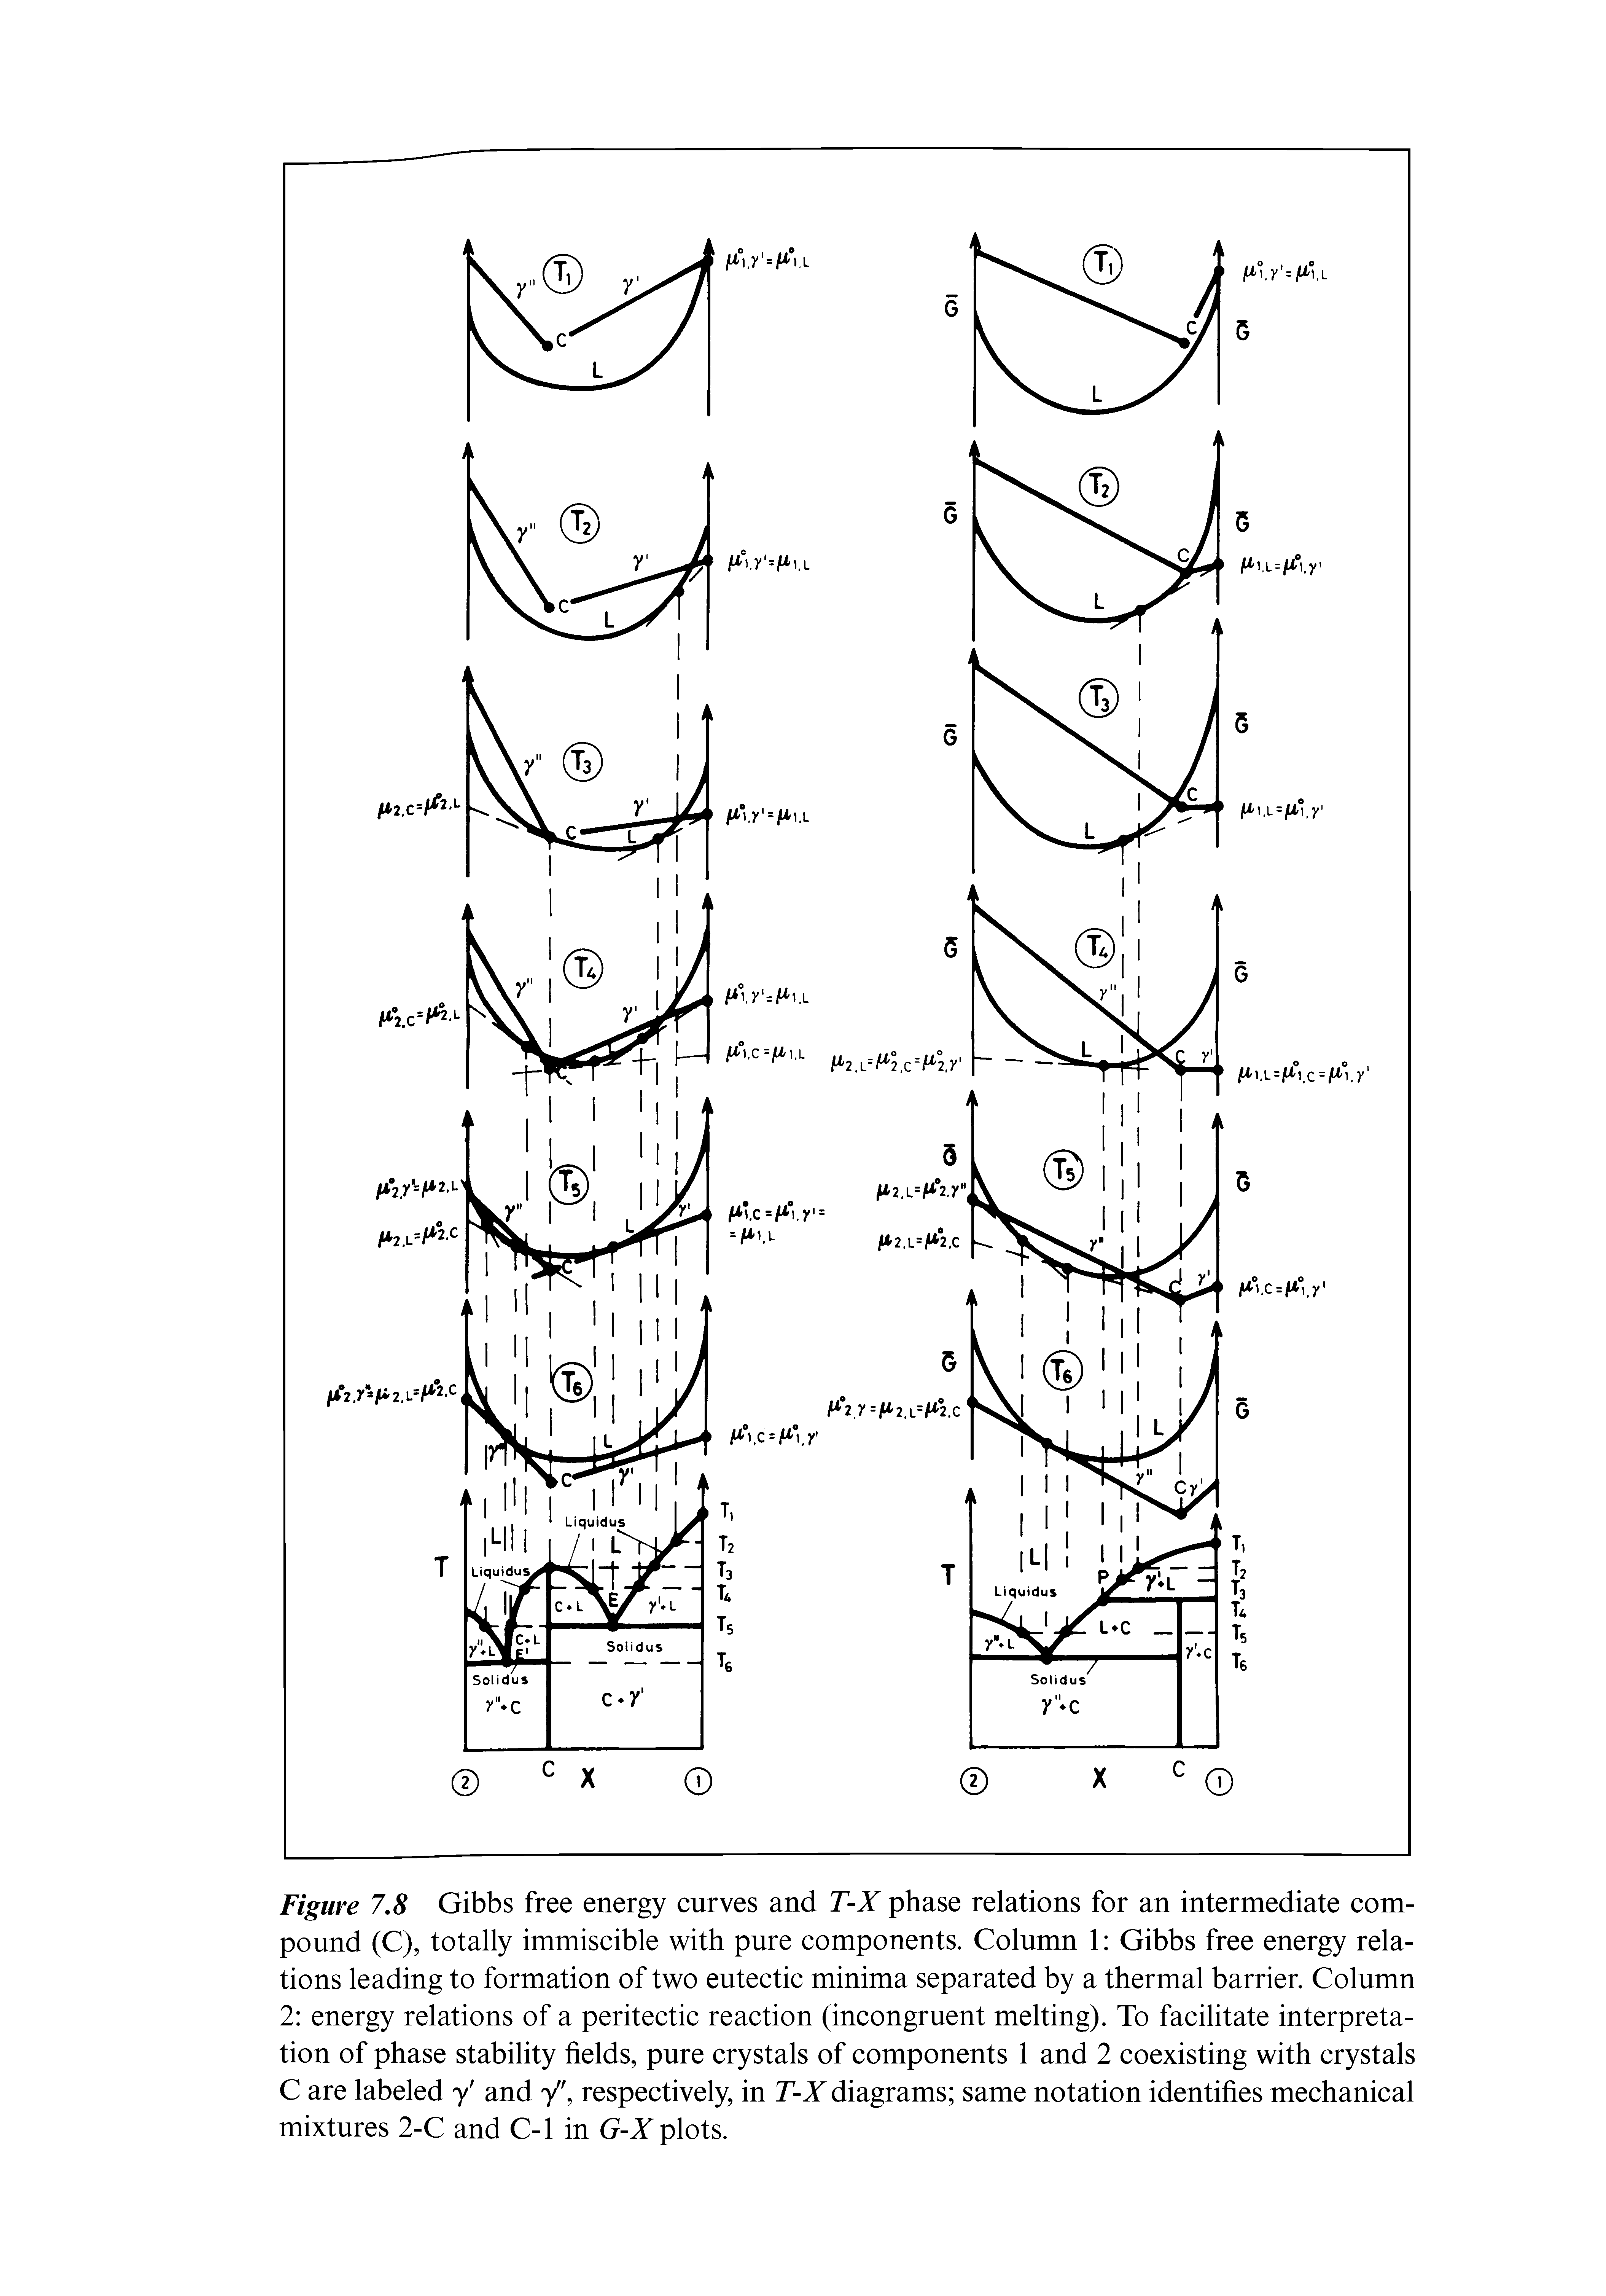 Figure 7,8 Gibbs free energy curves and T-X phase relations for an intermediate compound (C), totally immiscible with pure components. Column 1 Gibbs free energy relations leading to formation of two eutectic minima separated by a thermal barrier. Column 2 energy relations of a peritectic reaction (incongruent melting). To facilitate interpretation of phase stability fields, pure crystals of components 1 and 2 coexisting with crystals C are labeled y and y", respectively, in T-X diagrams same notation identifies mechanical mixtures 2-C and C-1 in G-X plots.